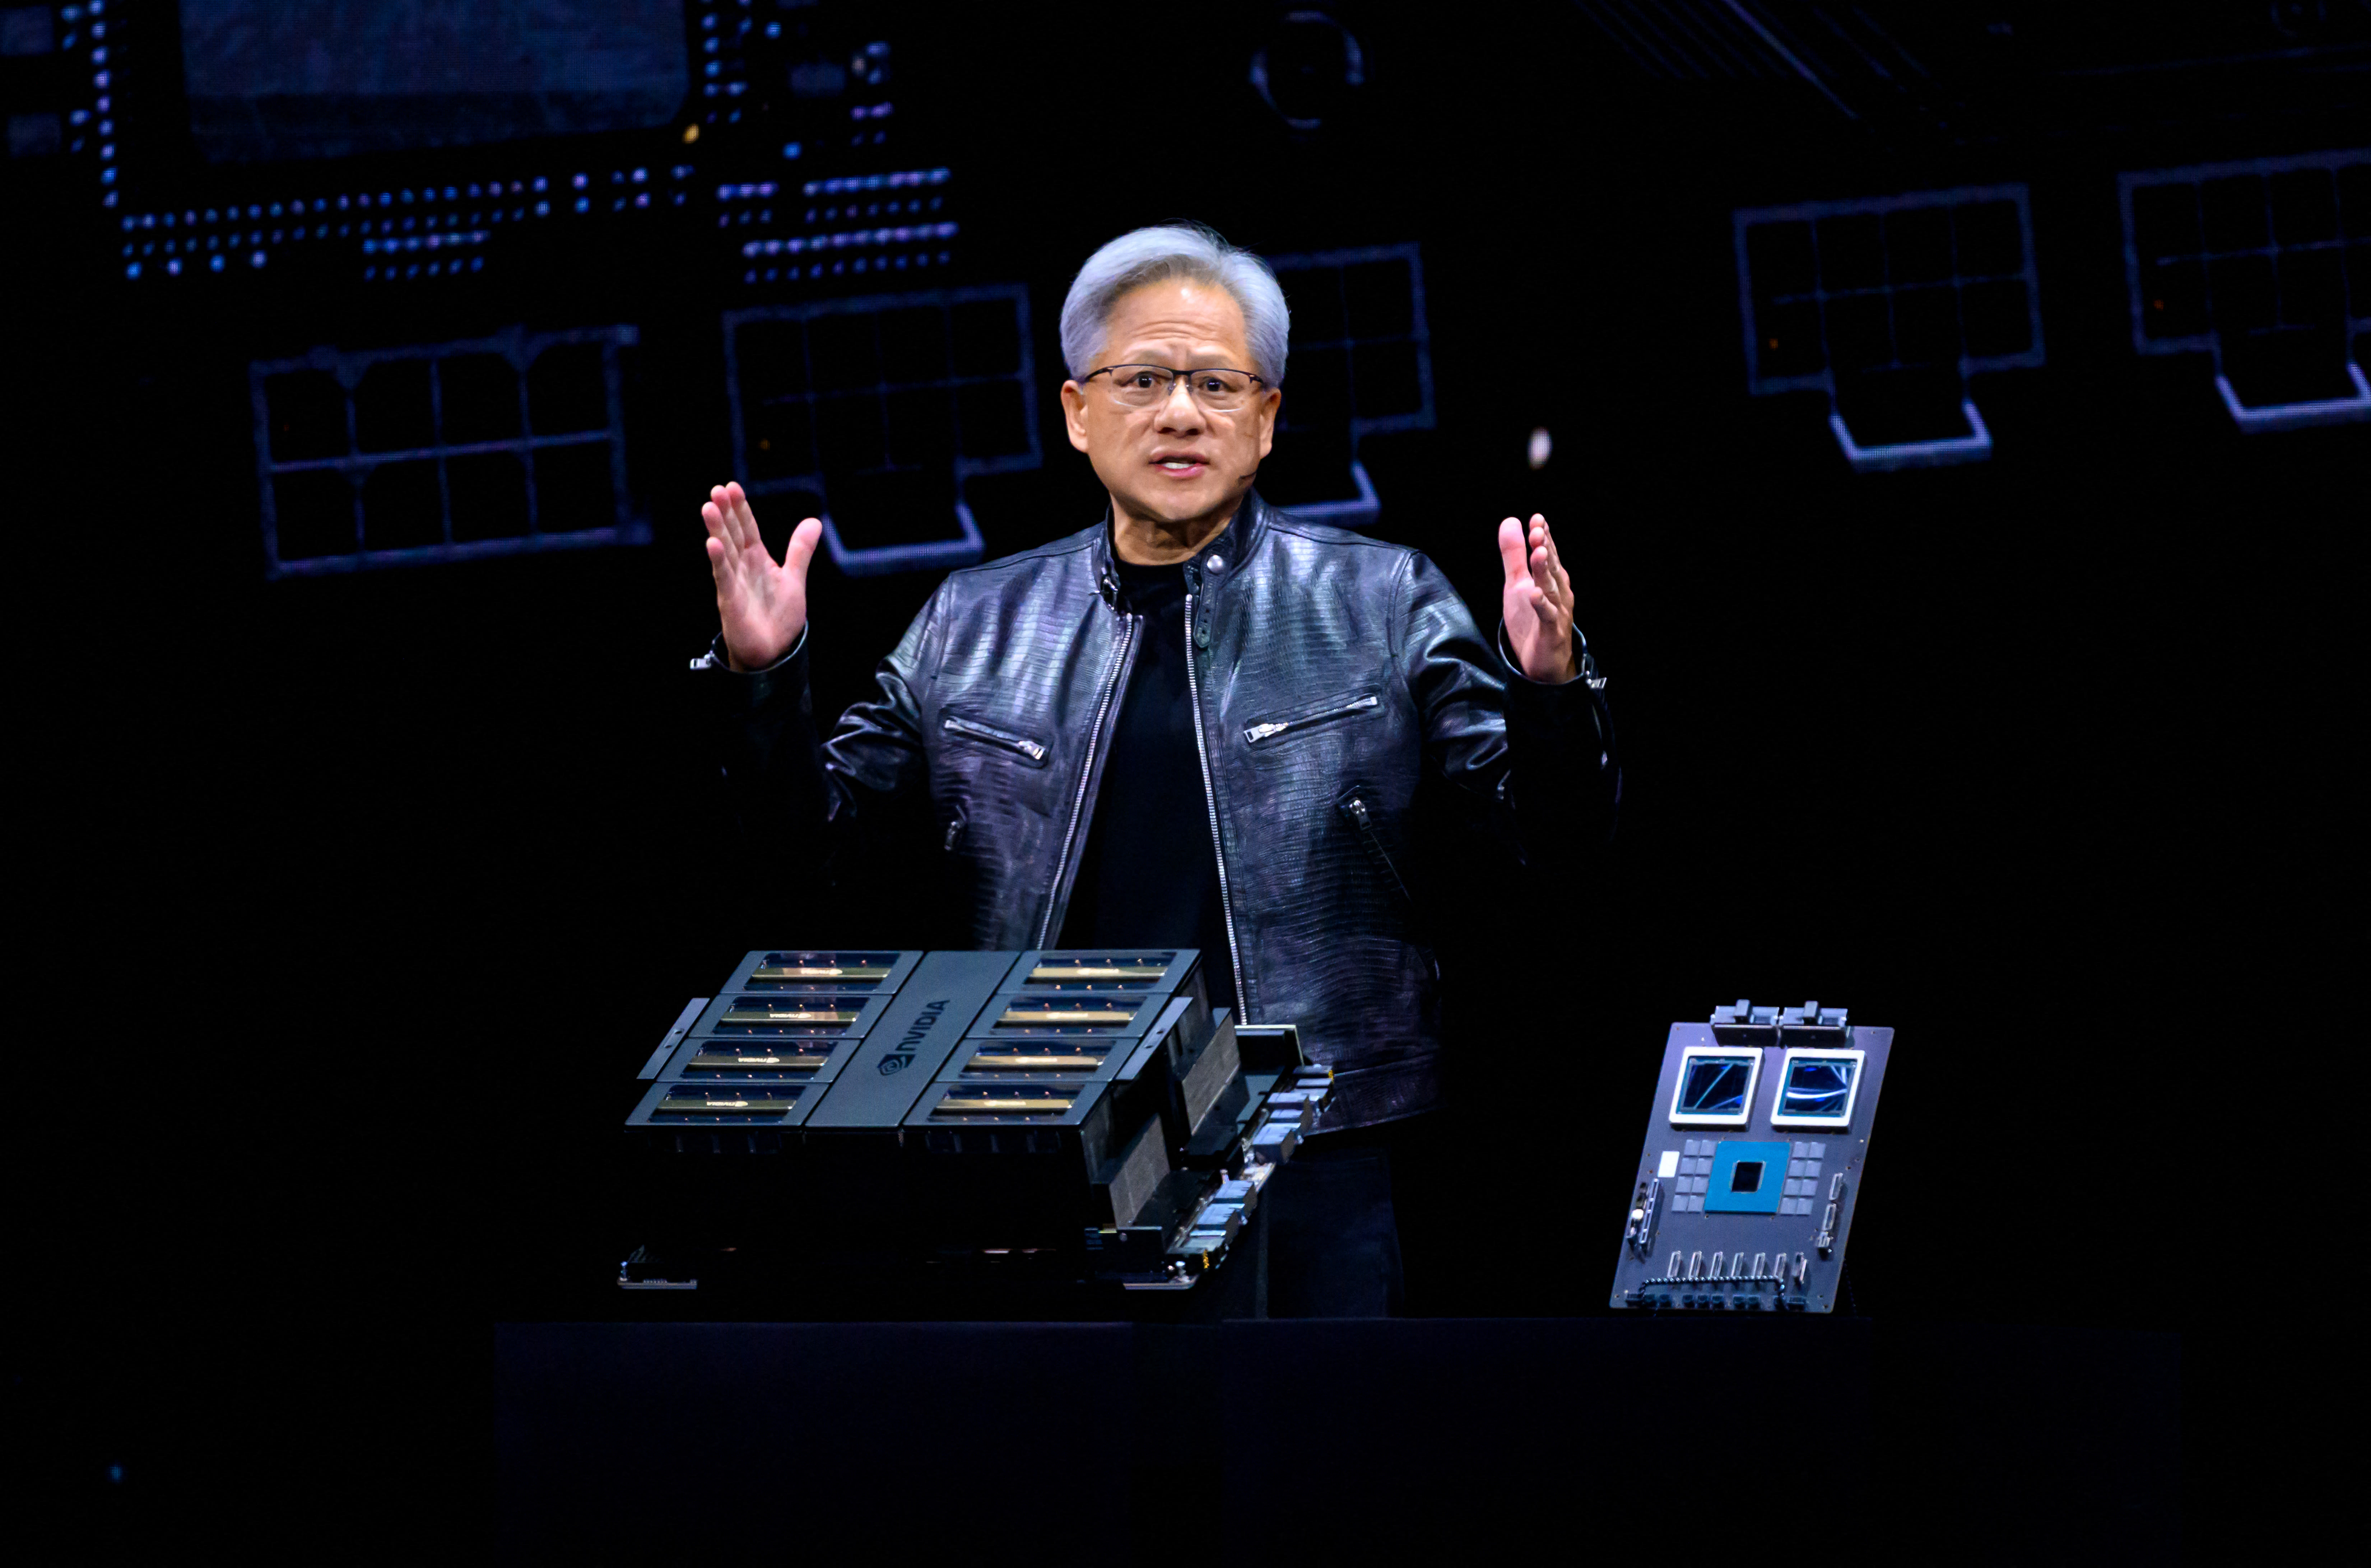 Nvidia stock pops 9%, tops $1,000 after earnings beat forecasts, announces stock split and dividend hike